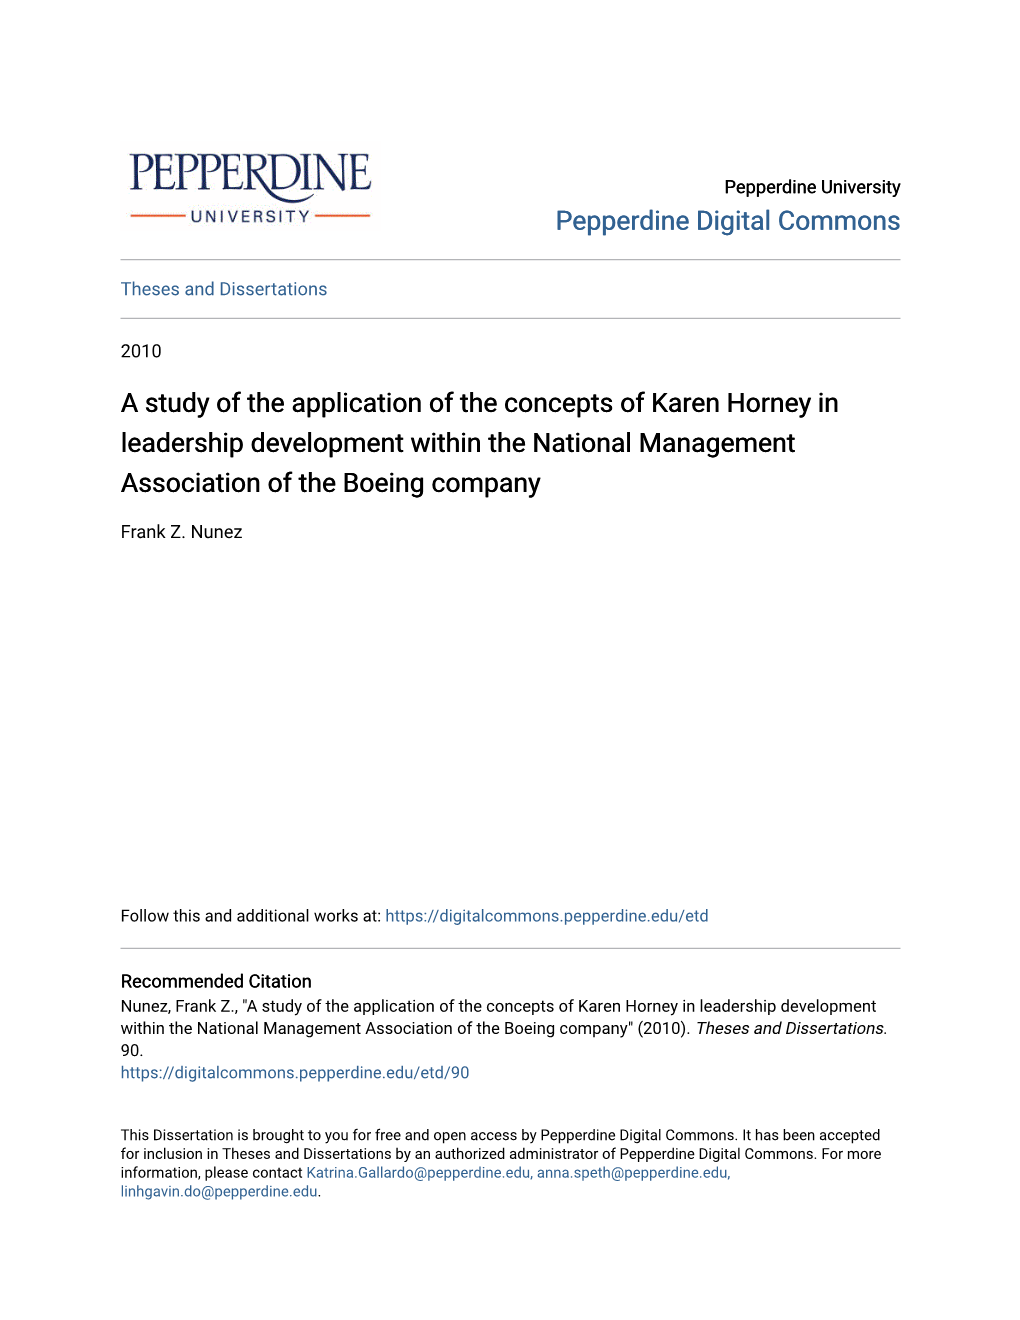 A Study of the Application of the Concepts of Karen Horney in Leadership Development Within the National Management Association of the Boeing Company